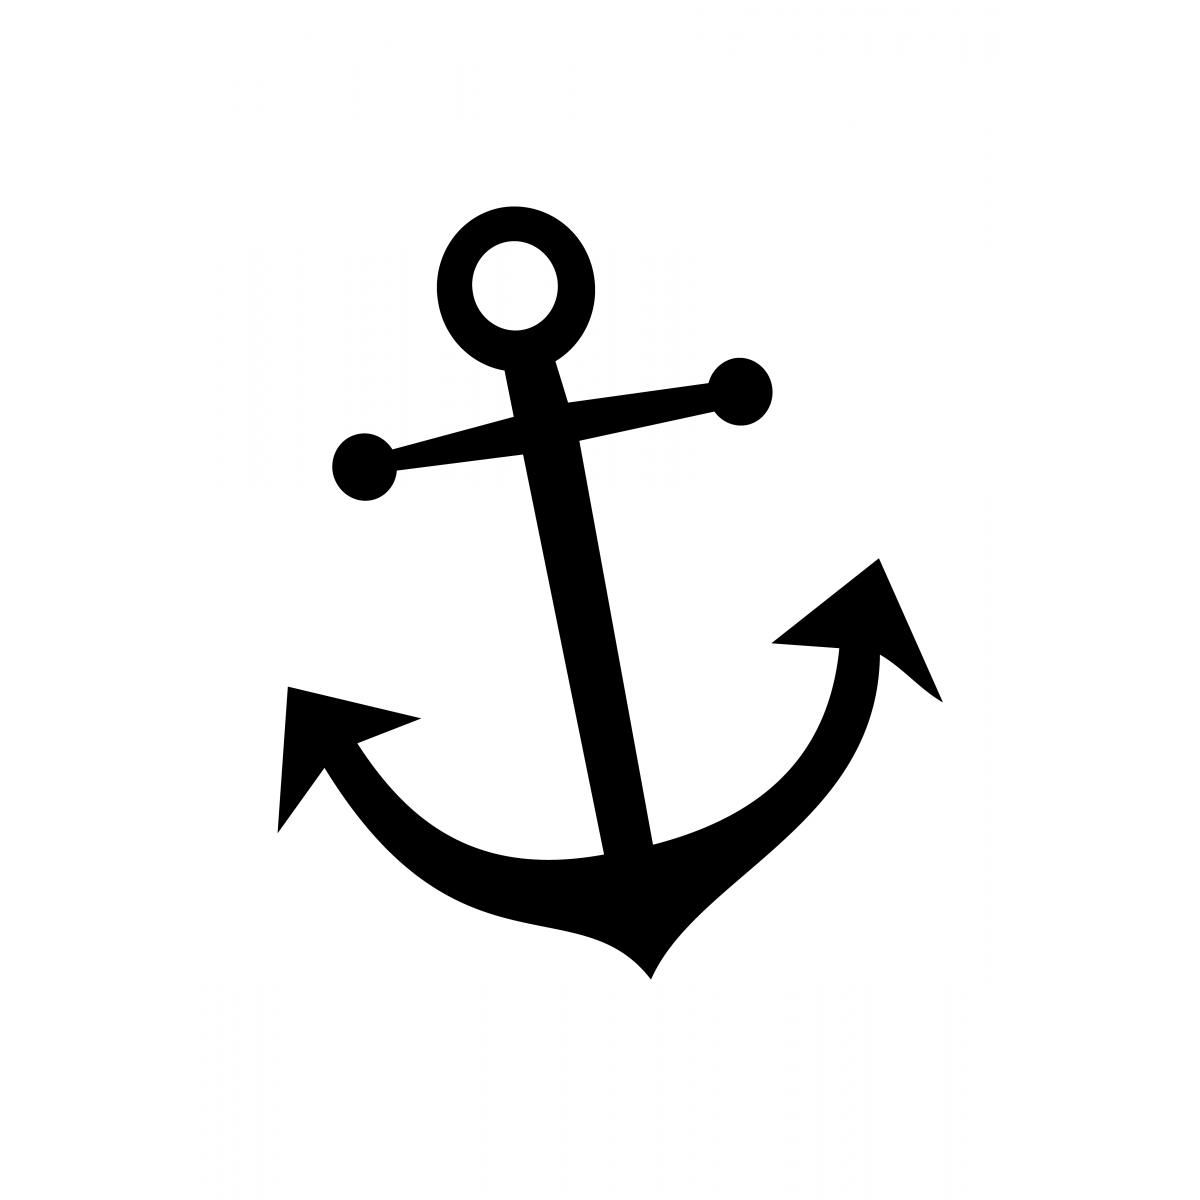 Free simple anchor.